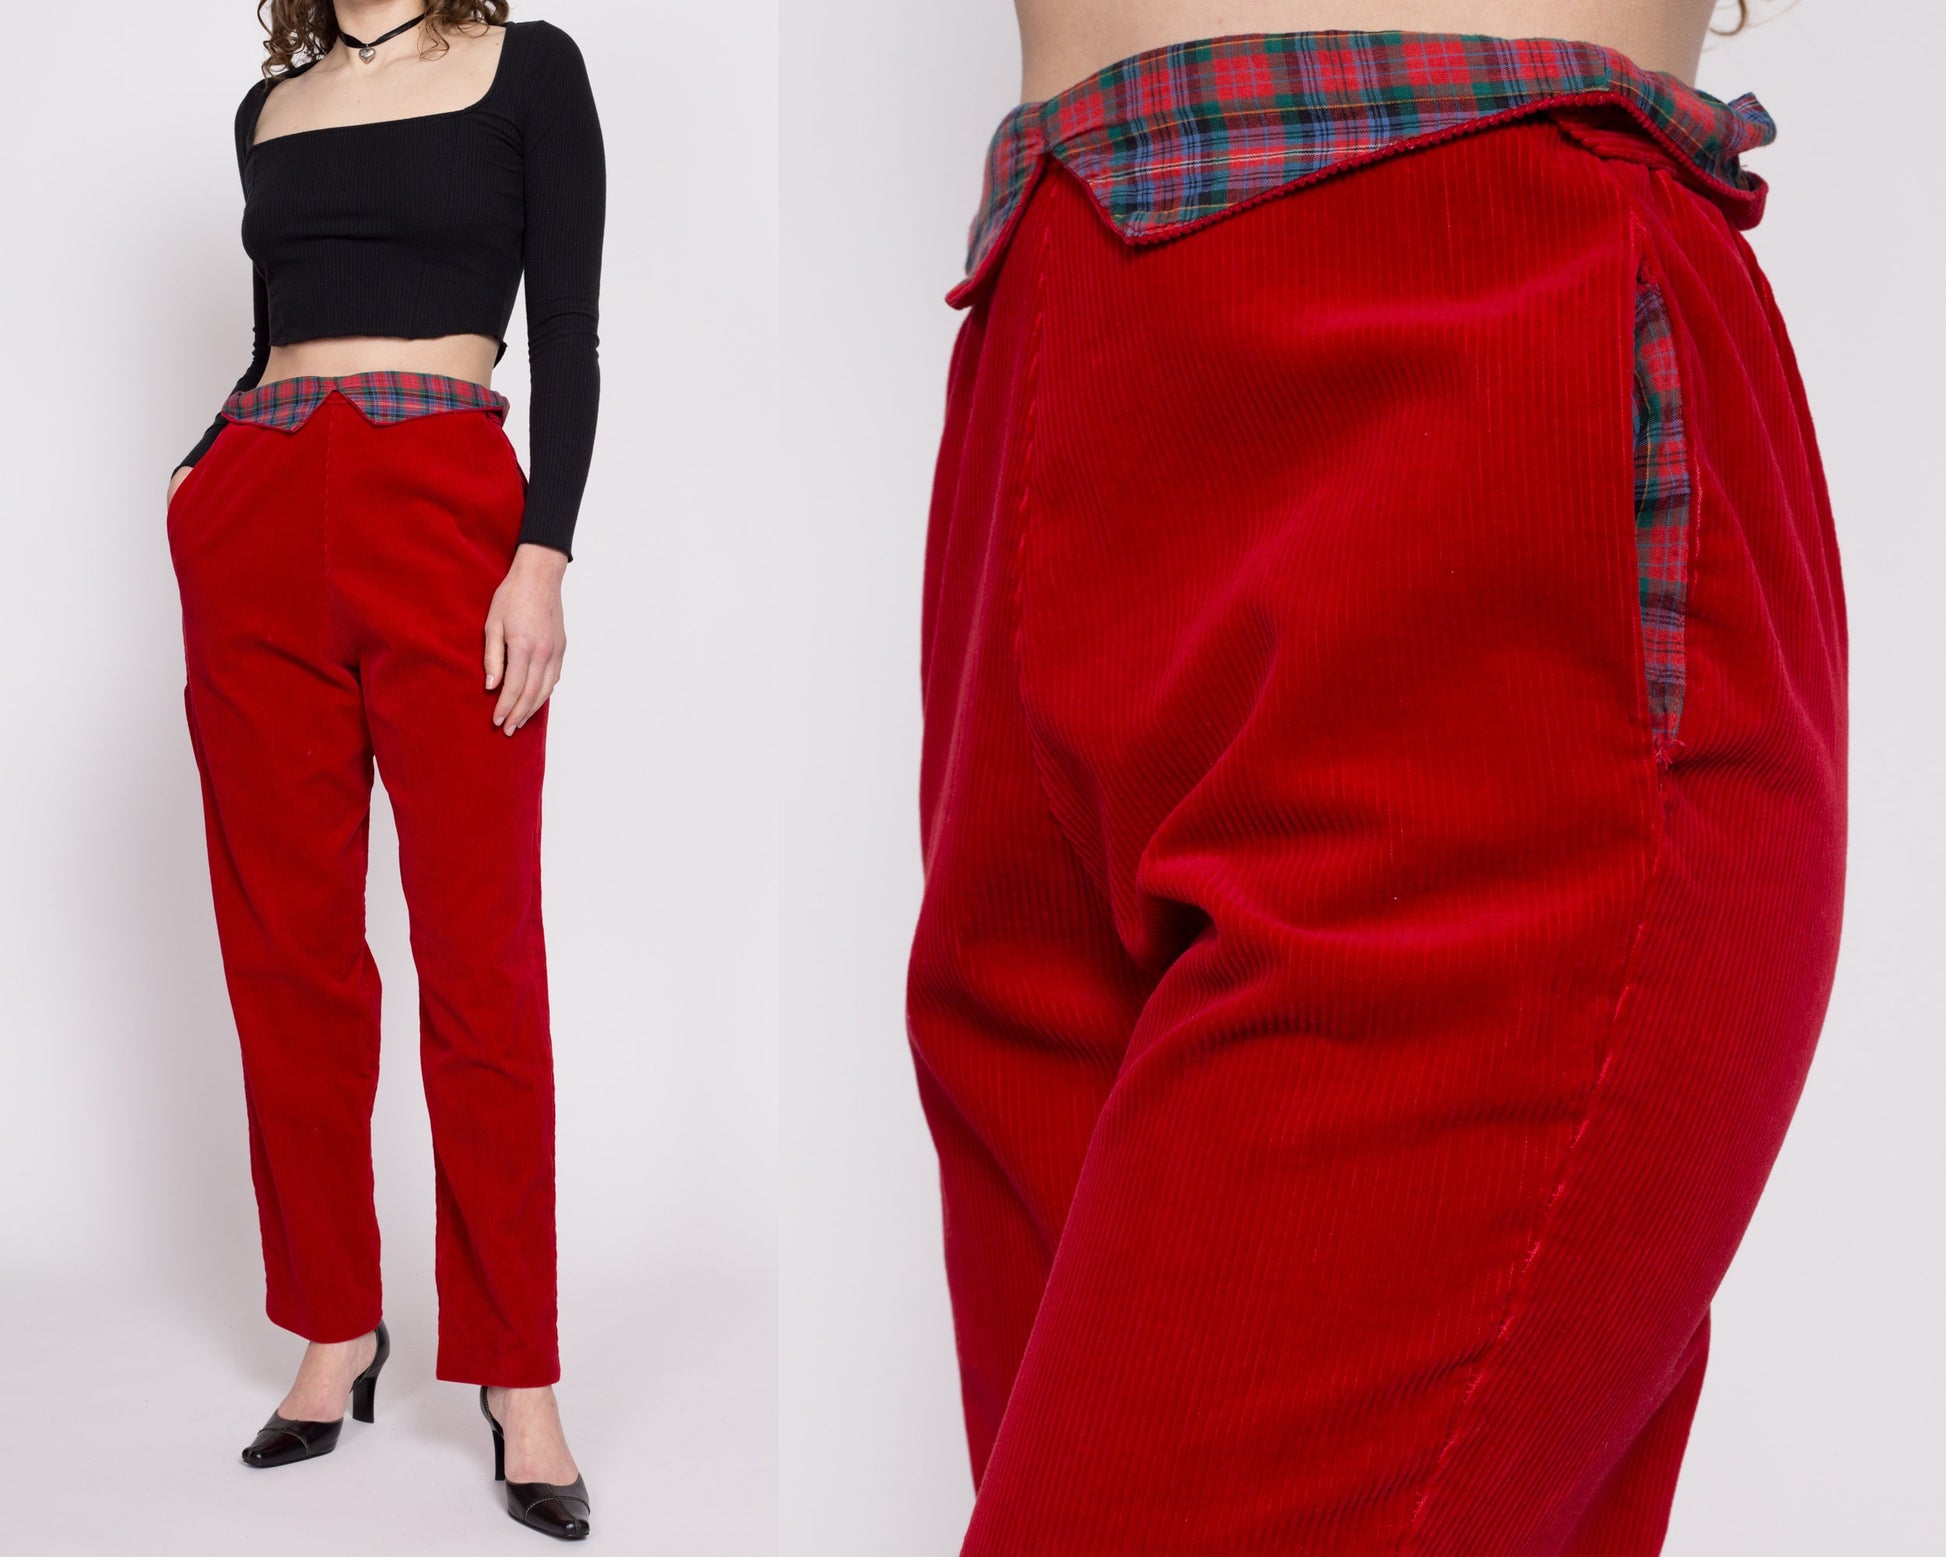 80s Red Corduroy Plaid Trim Pants - Medium | Vintage High Waisted Fold Over Paperbag Tapered Leg Retro Trousers